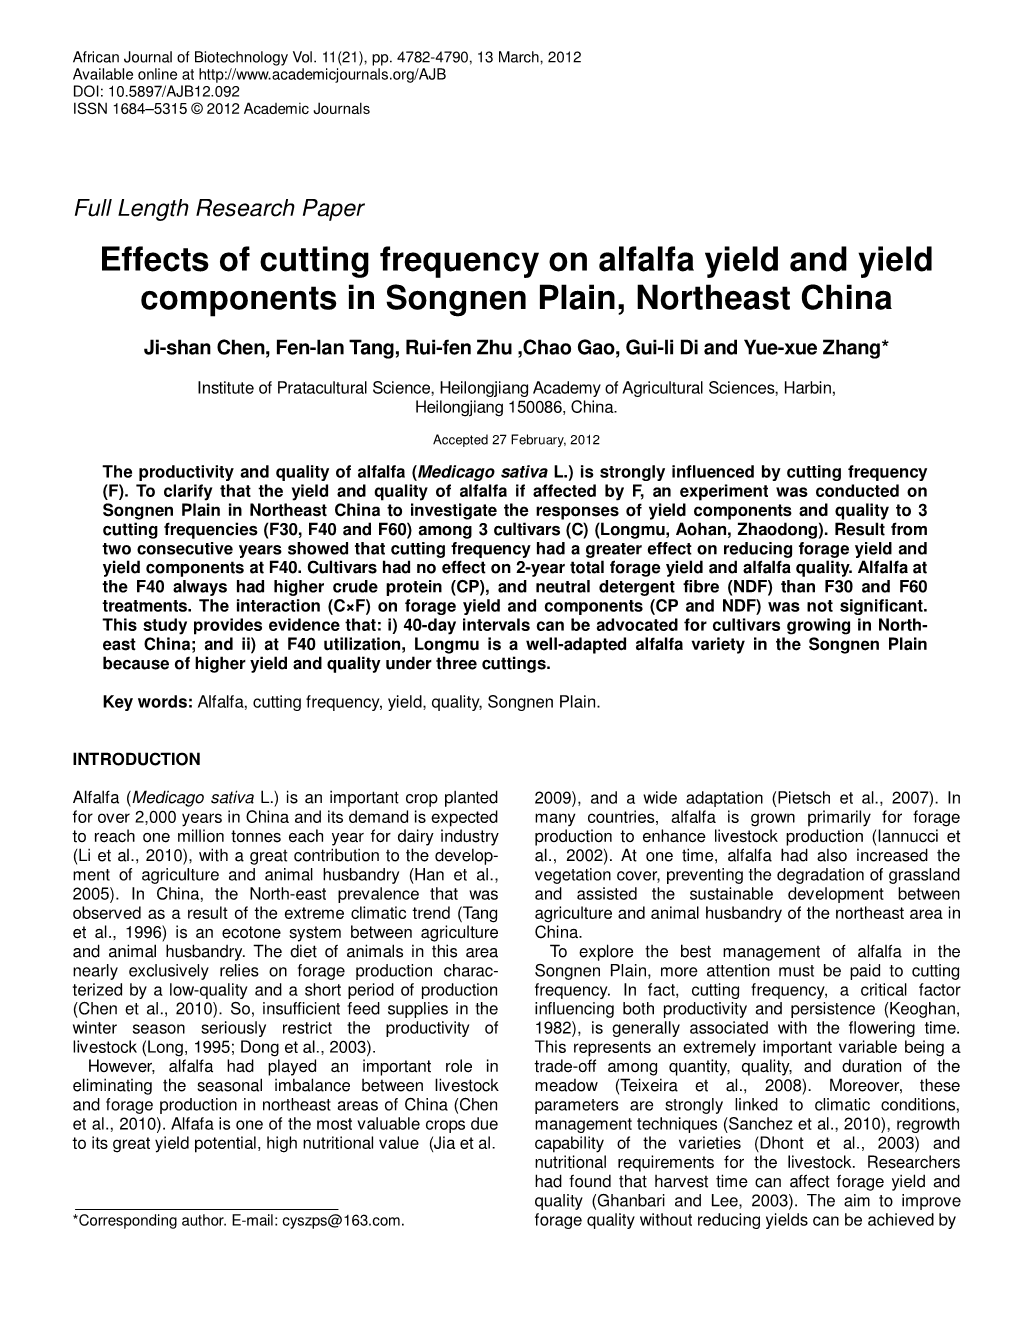 Effects of Cutting Frequency on Alfalfa Yield and Yield Components in Songnen Plain, Northeast China